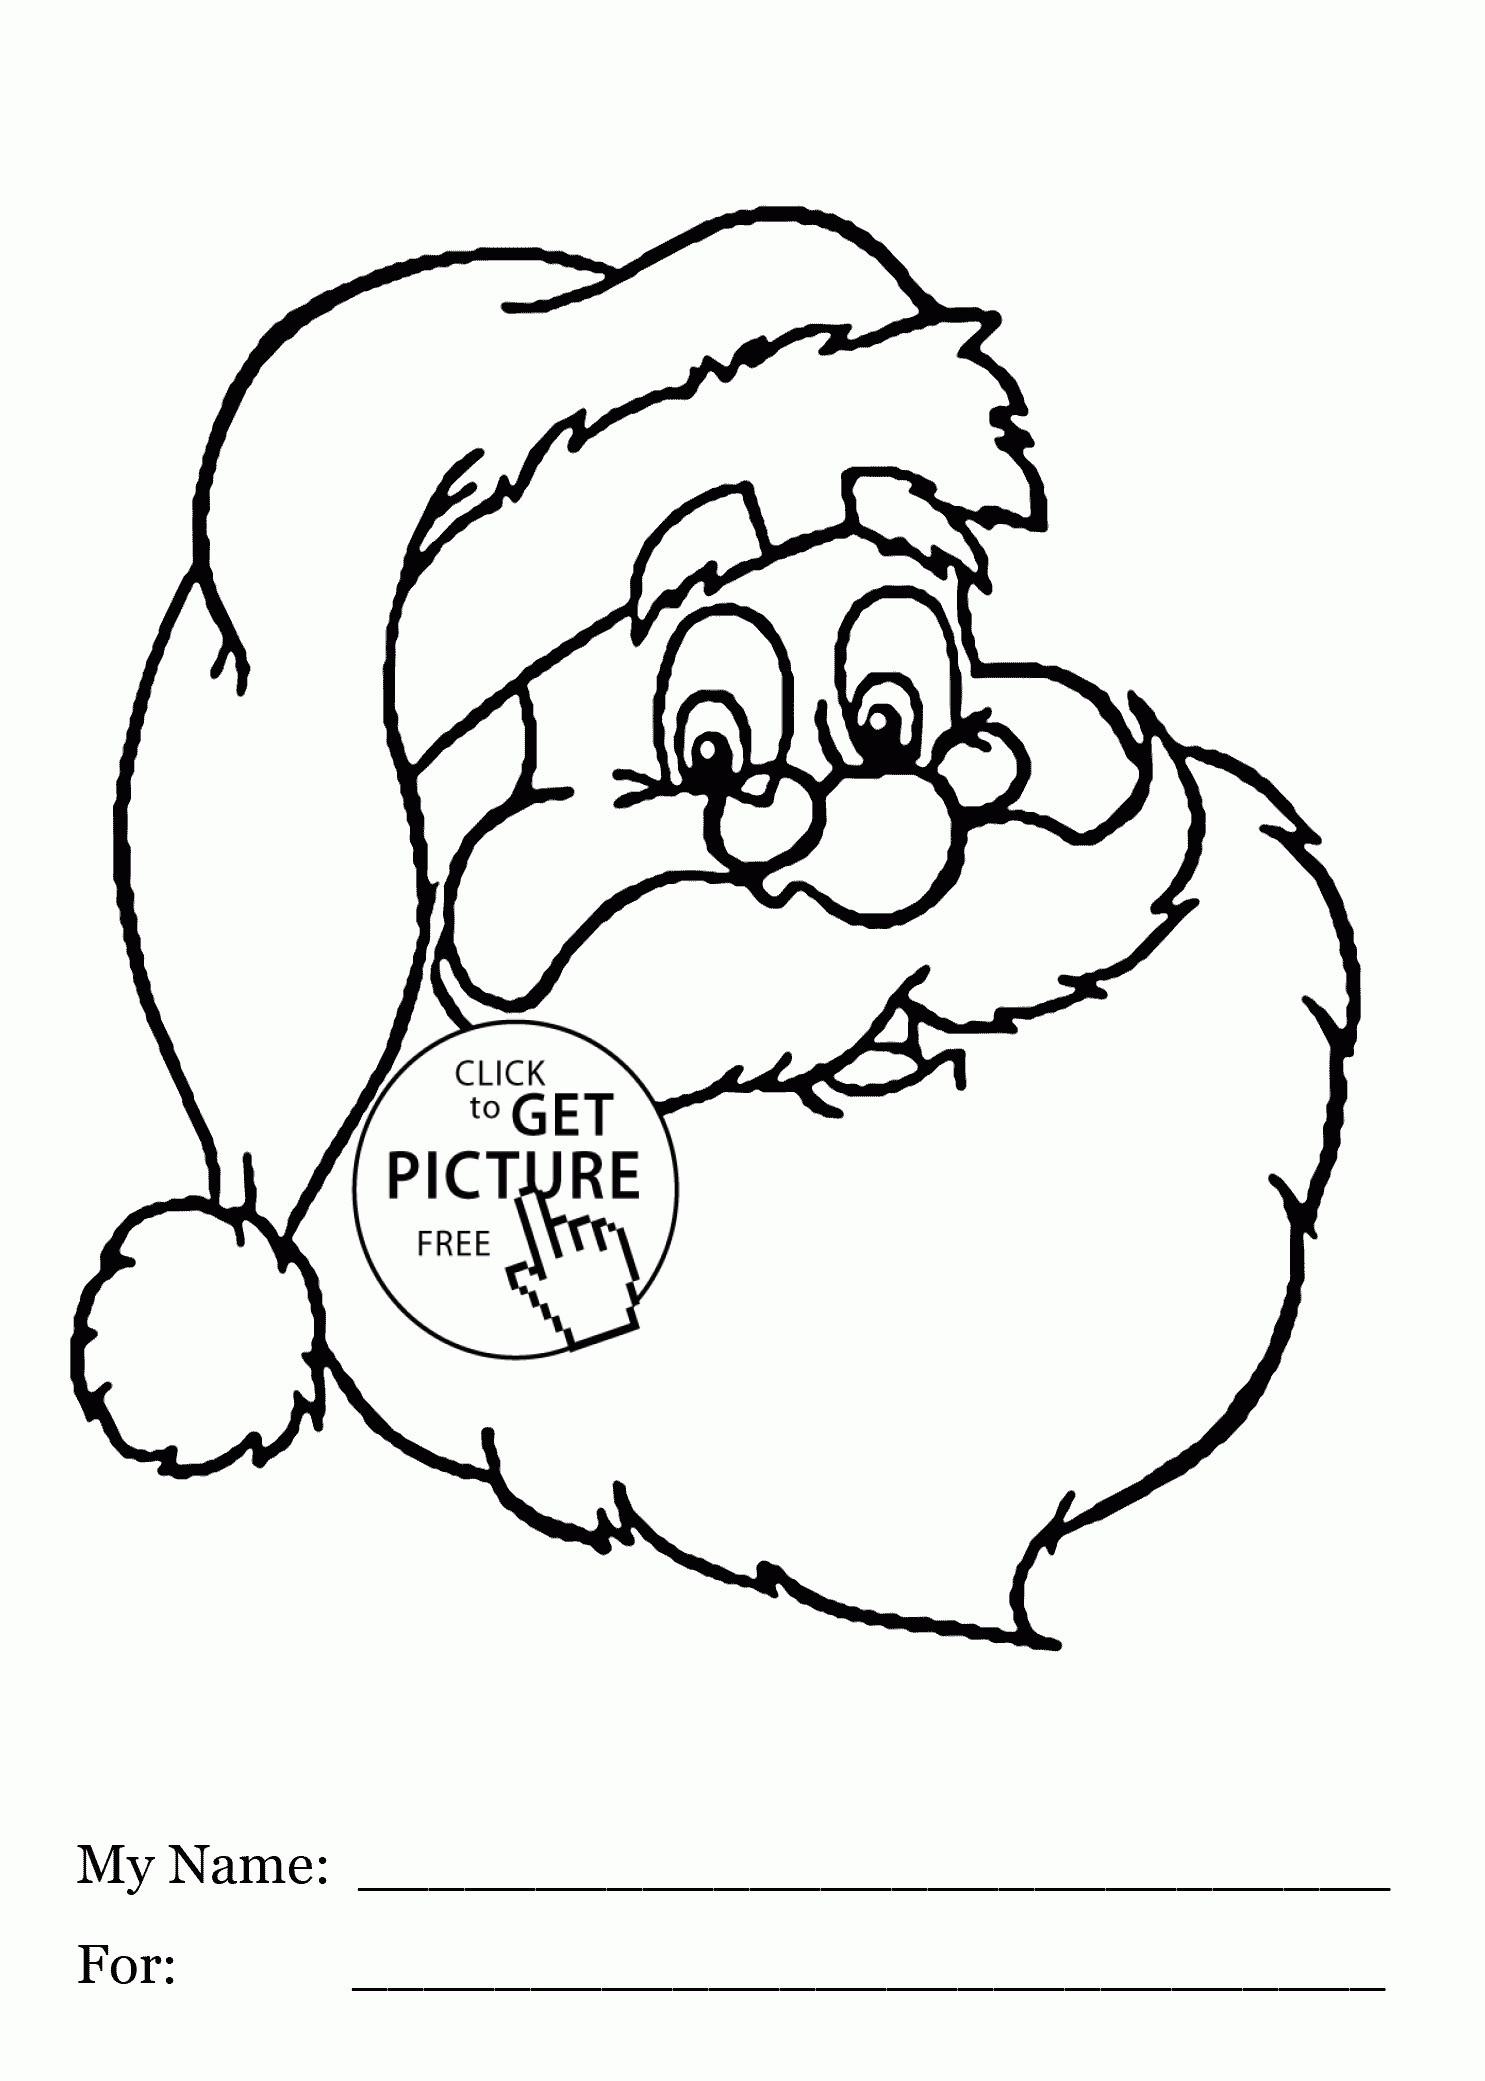 excellently Claus had coloring pages for kids printable free – coloring pages of santa claus